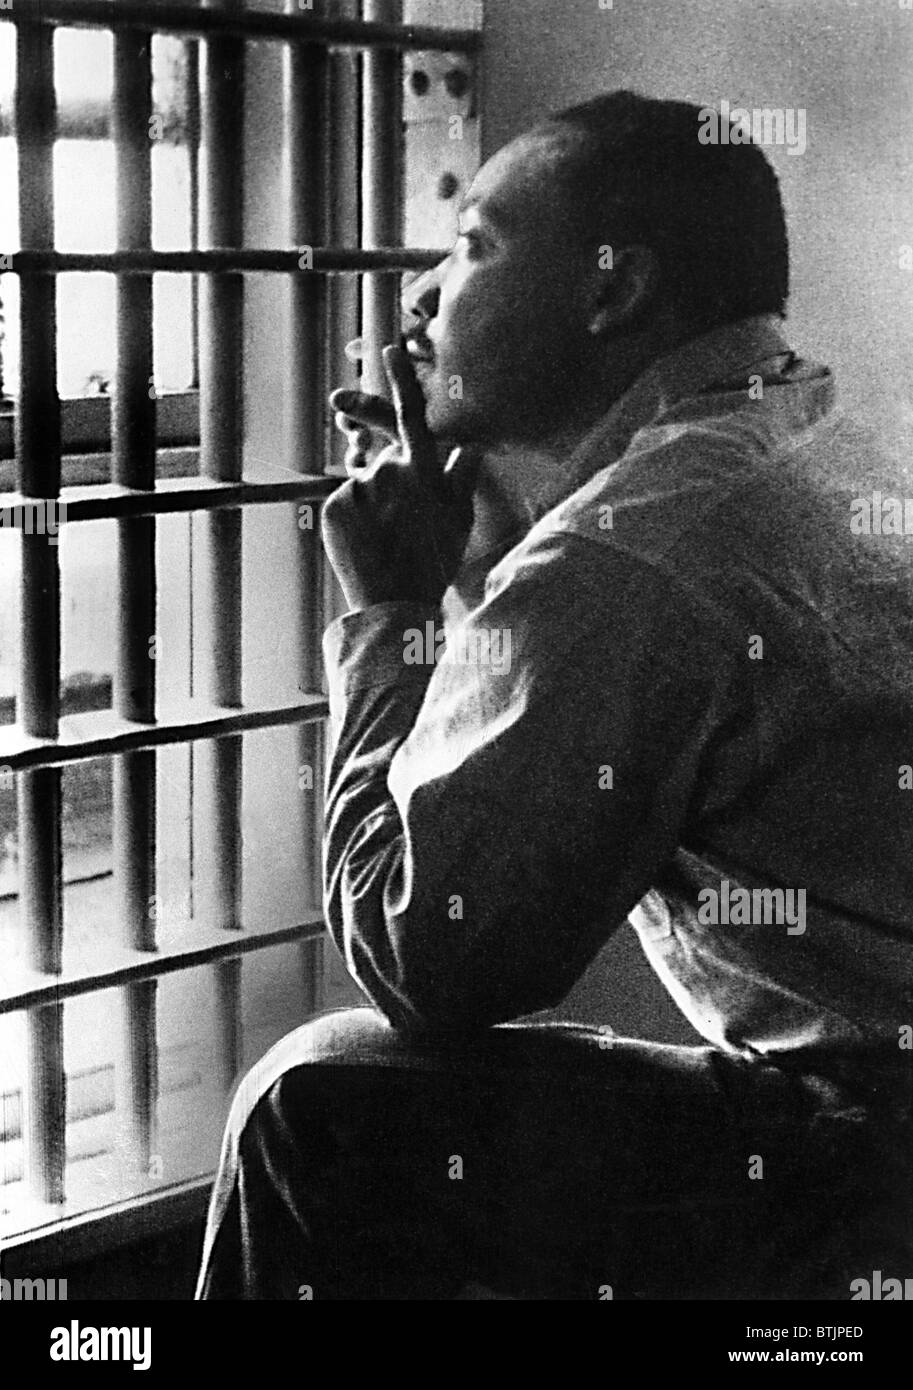 MARTIN LUTHER KING, JR, sitting in the Jefferson County Jail, in Birmingham, Alabama, 11/3/67. Everett/CSU Archives. Stock Photo